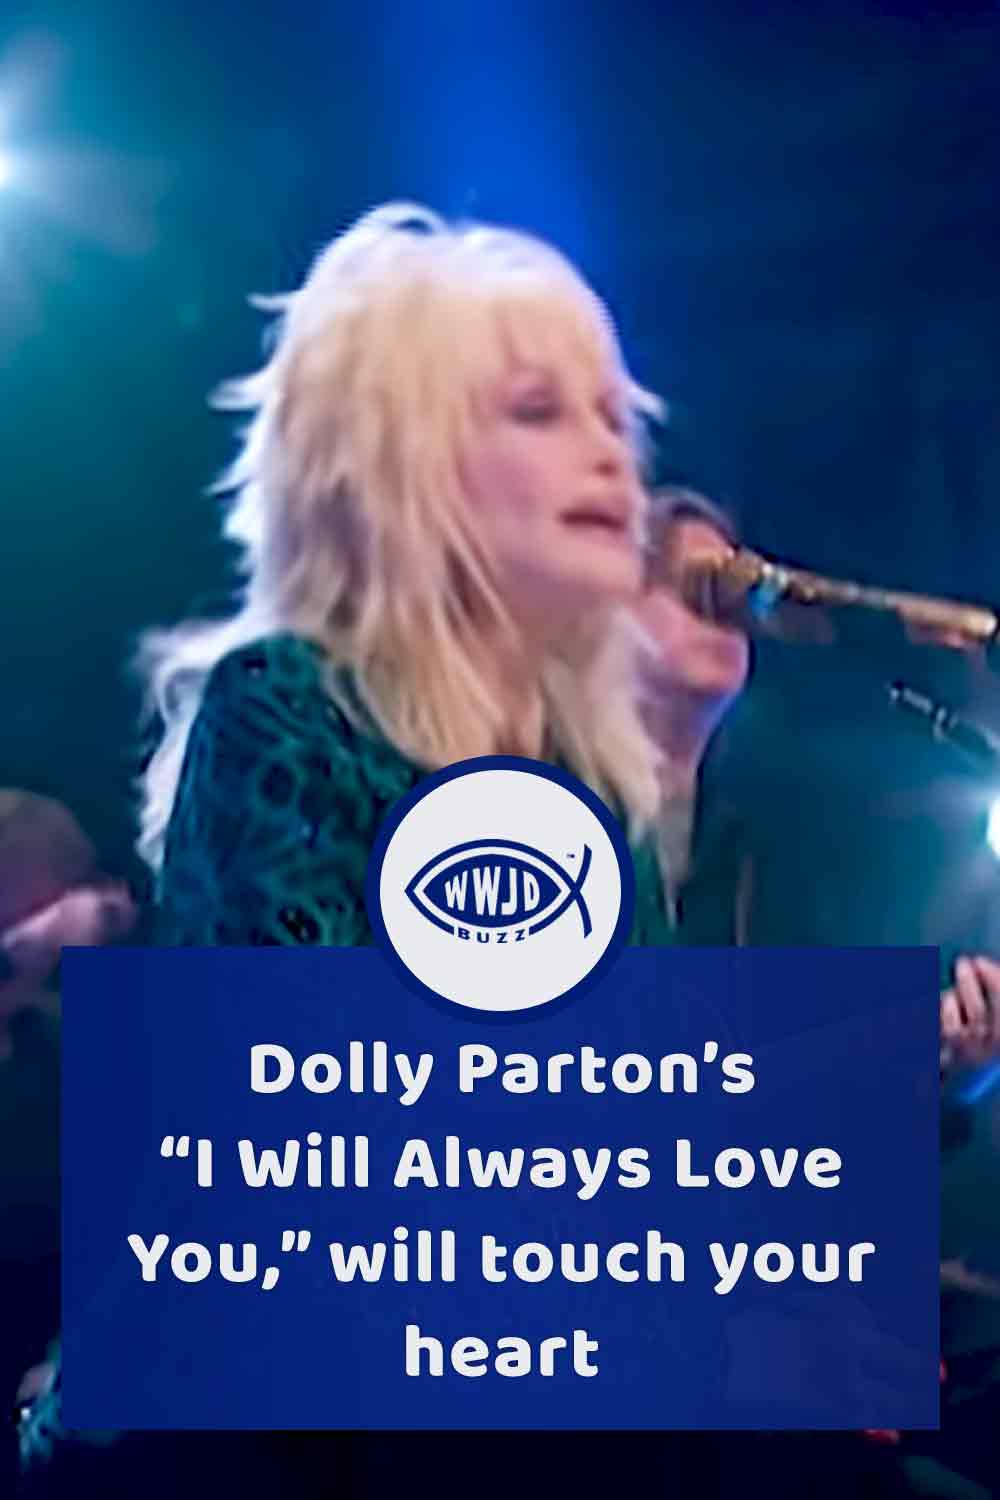 Dolly Parton’s “I Will Always Love You,” will touch your heart